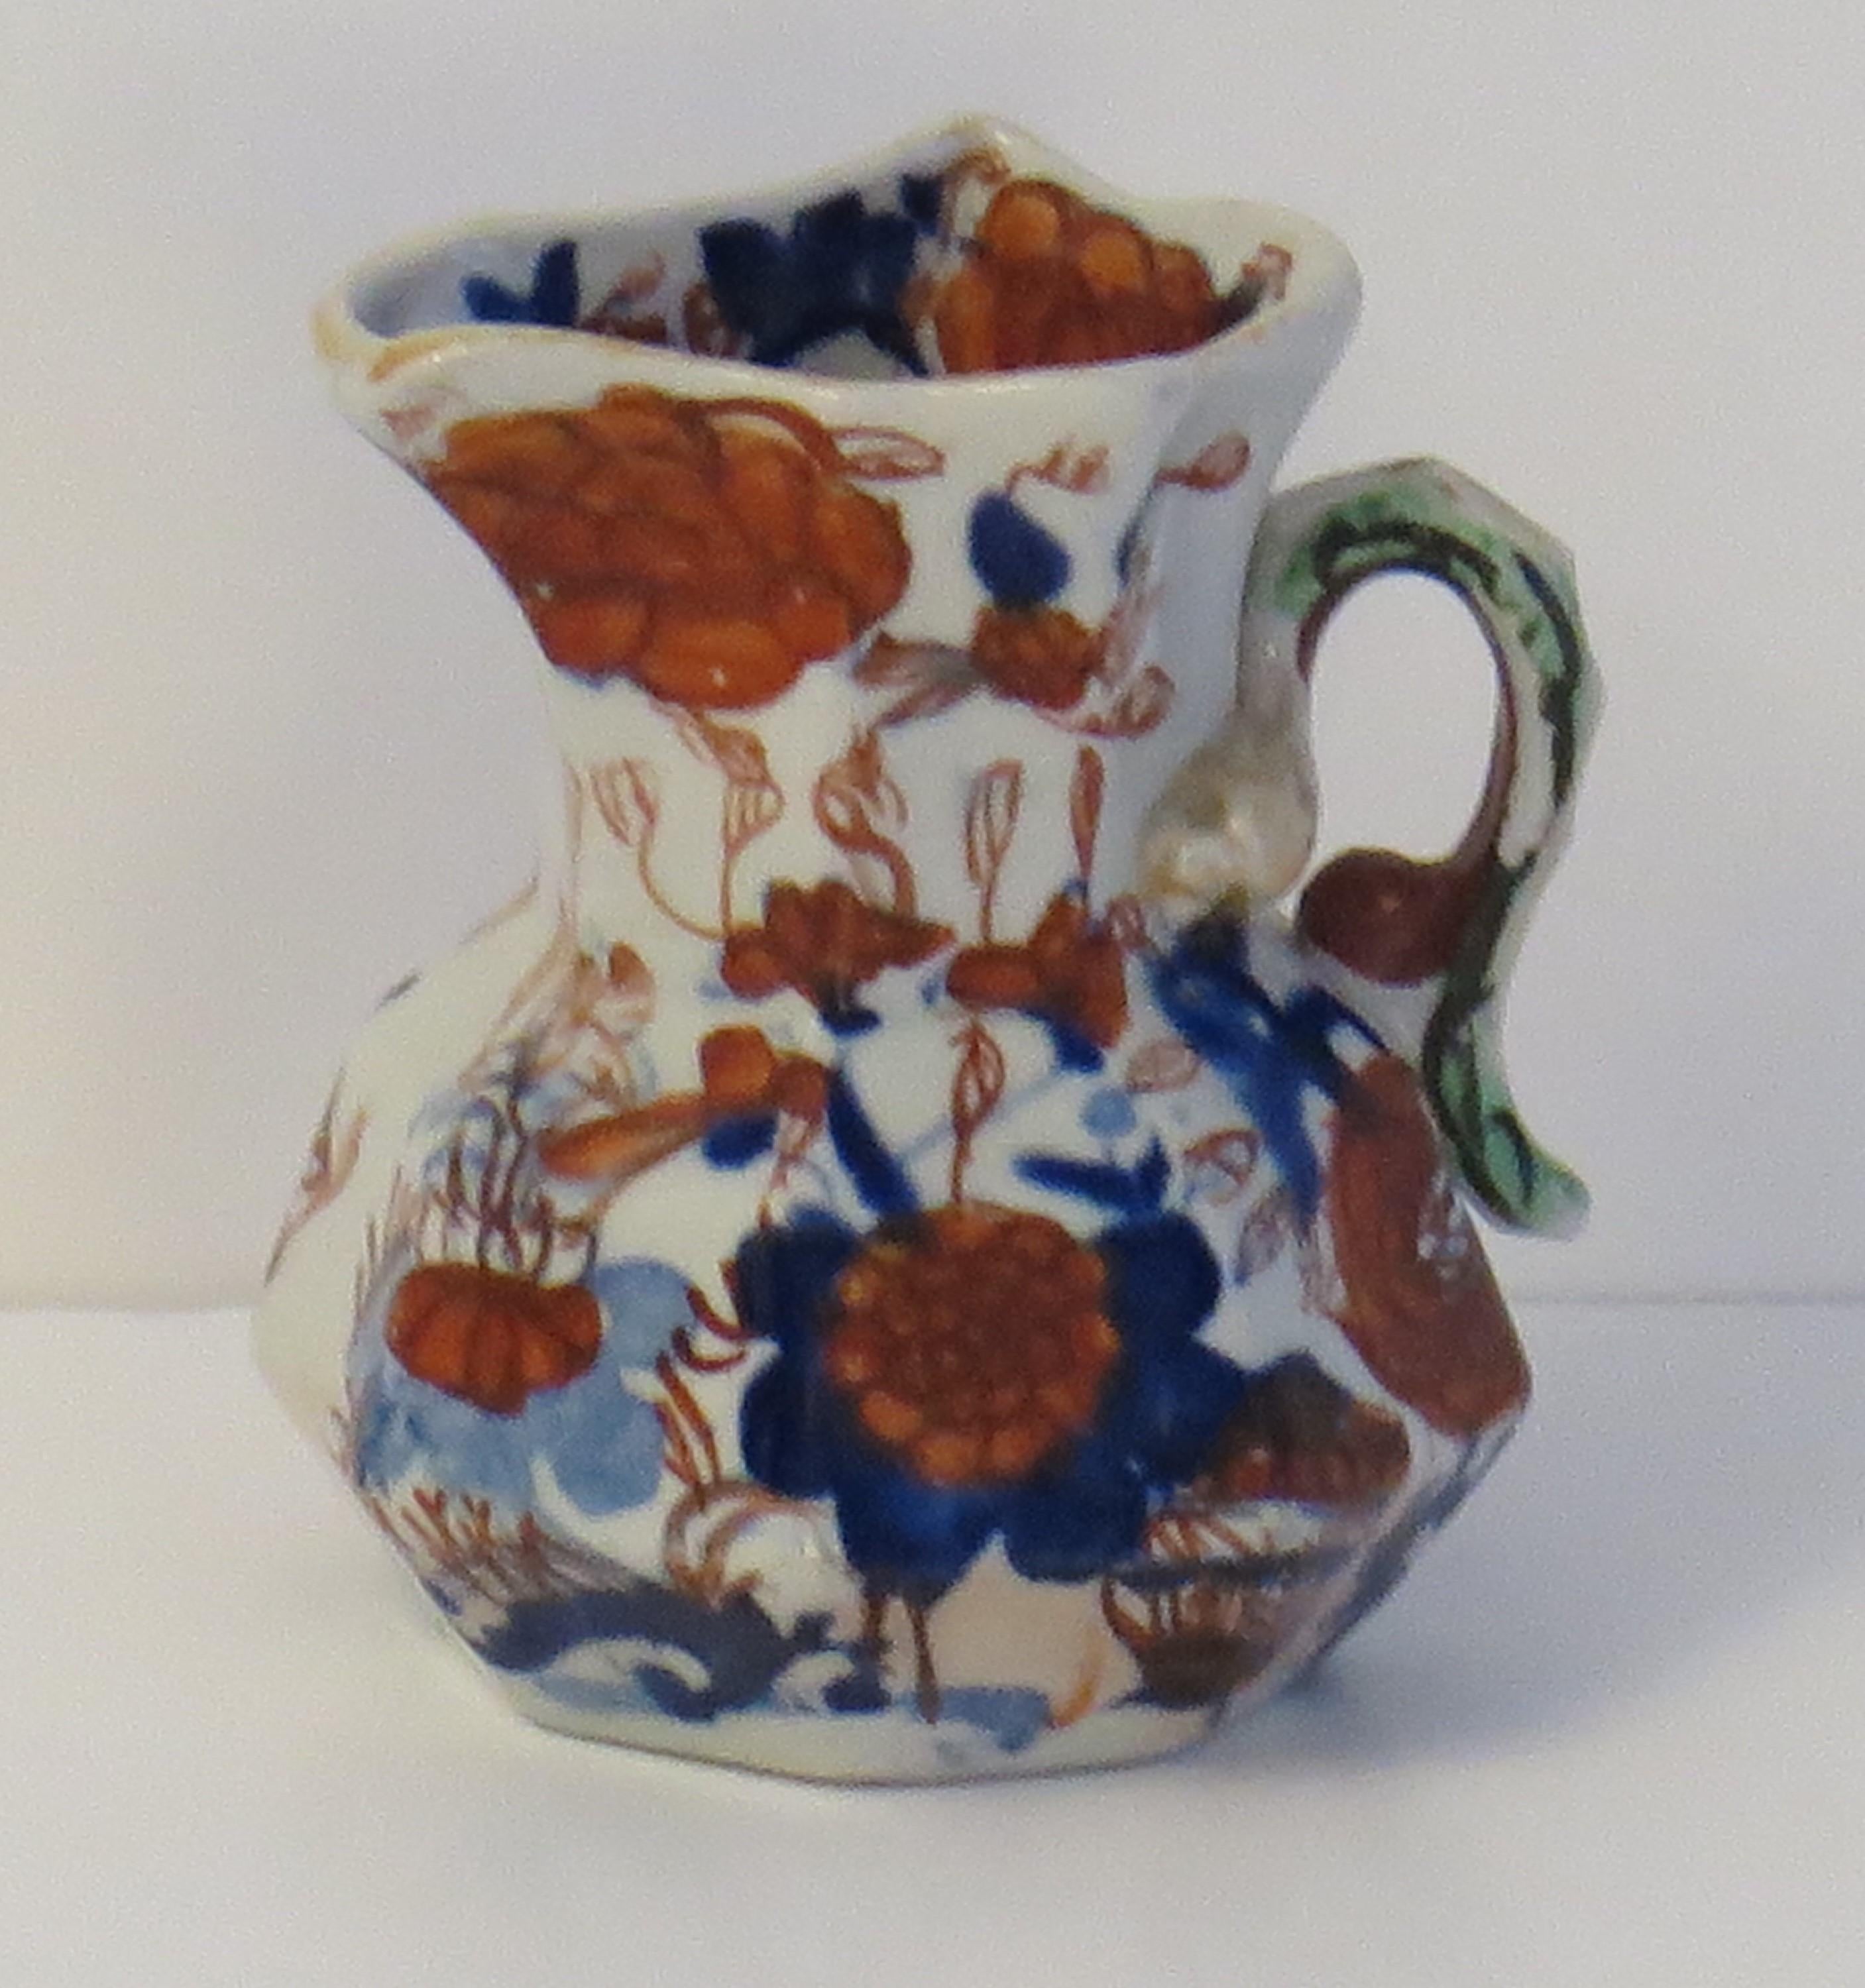 This is a good, early and very small Mason's Ironstone hydra jug or pitcher in the Basket Japan pattern, made in the English, late Georgian period, circa 1815-1820.

These hydra jugs were made in a large range of sizes with the rarer pieces being